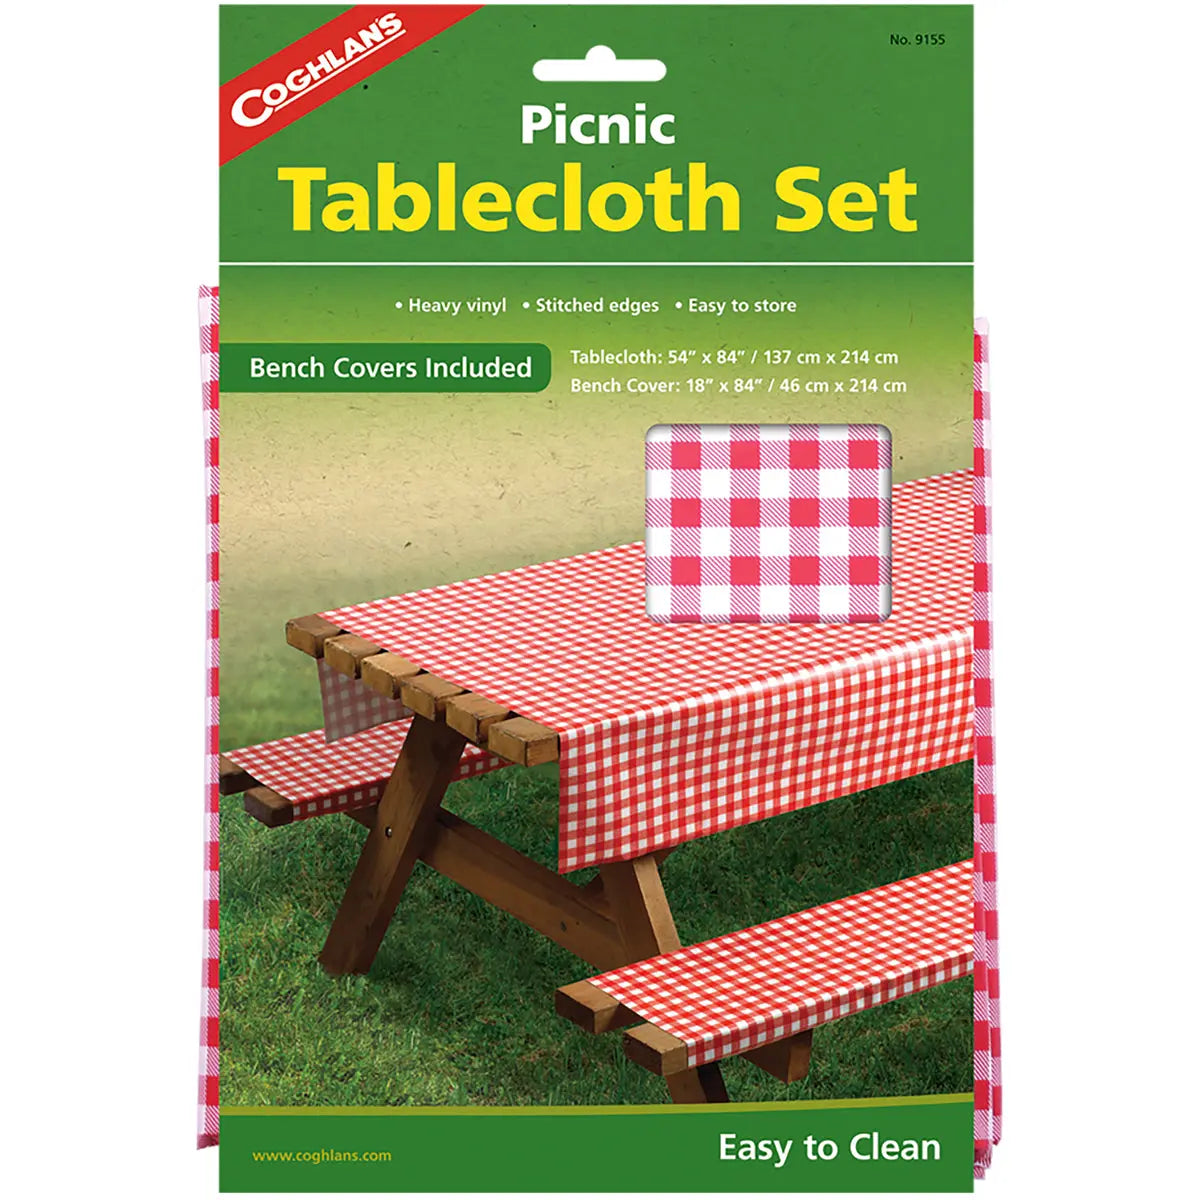 Coghlan's Picnic Table Set, Easy to Clean XL Tablecloth w/ Matching Bench Covers Coghlan's